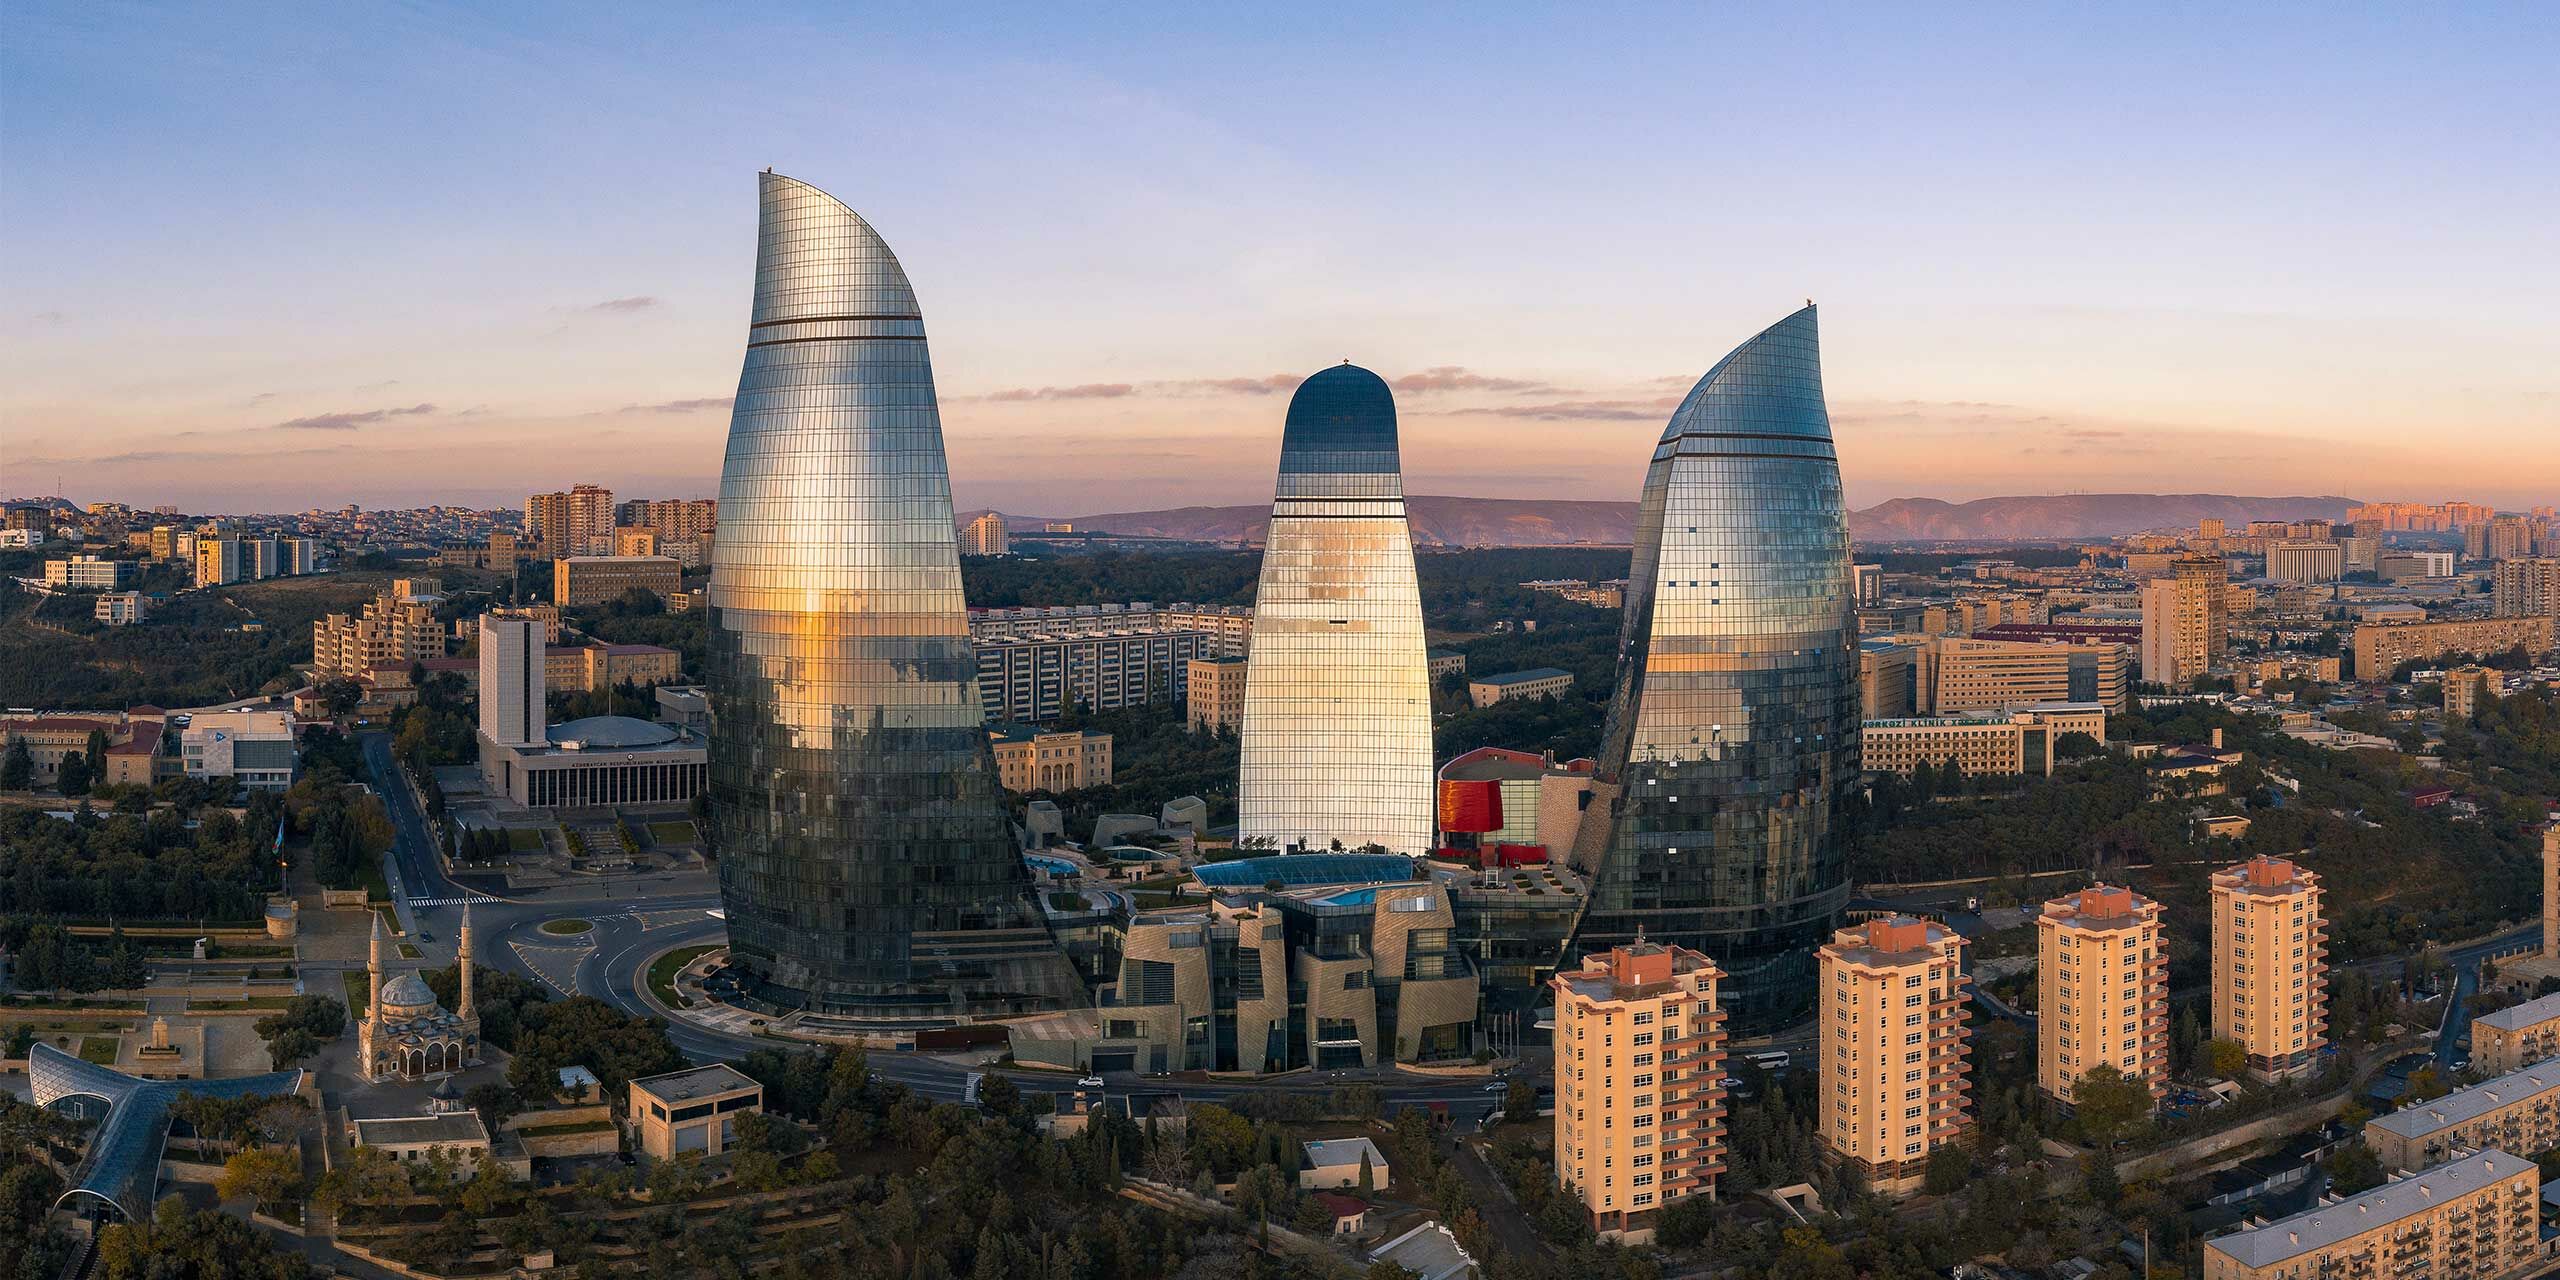 Baku: A Capital of Contrast on the Caspian - Travelogues from Remote Lands